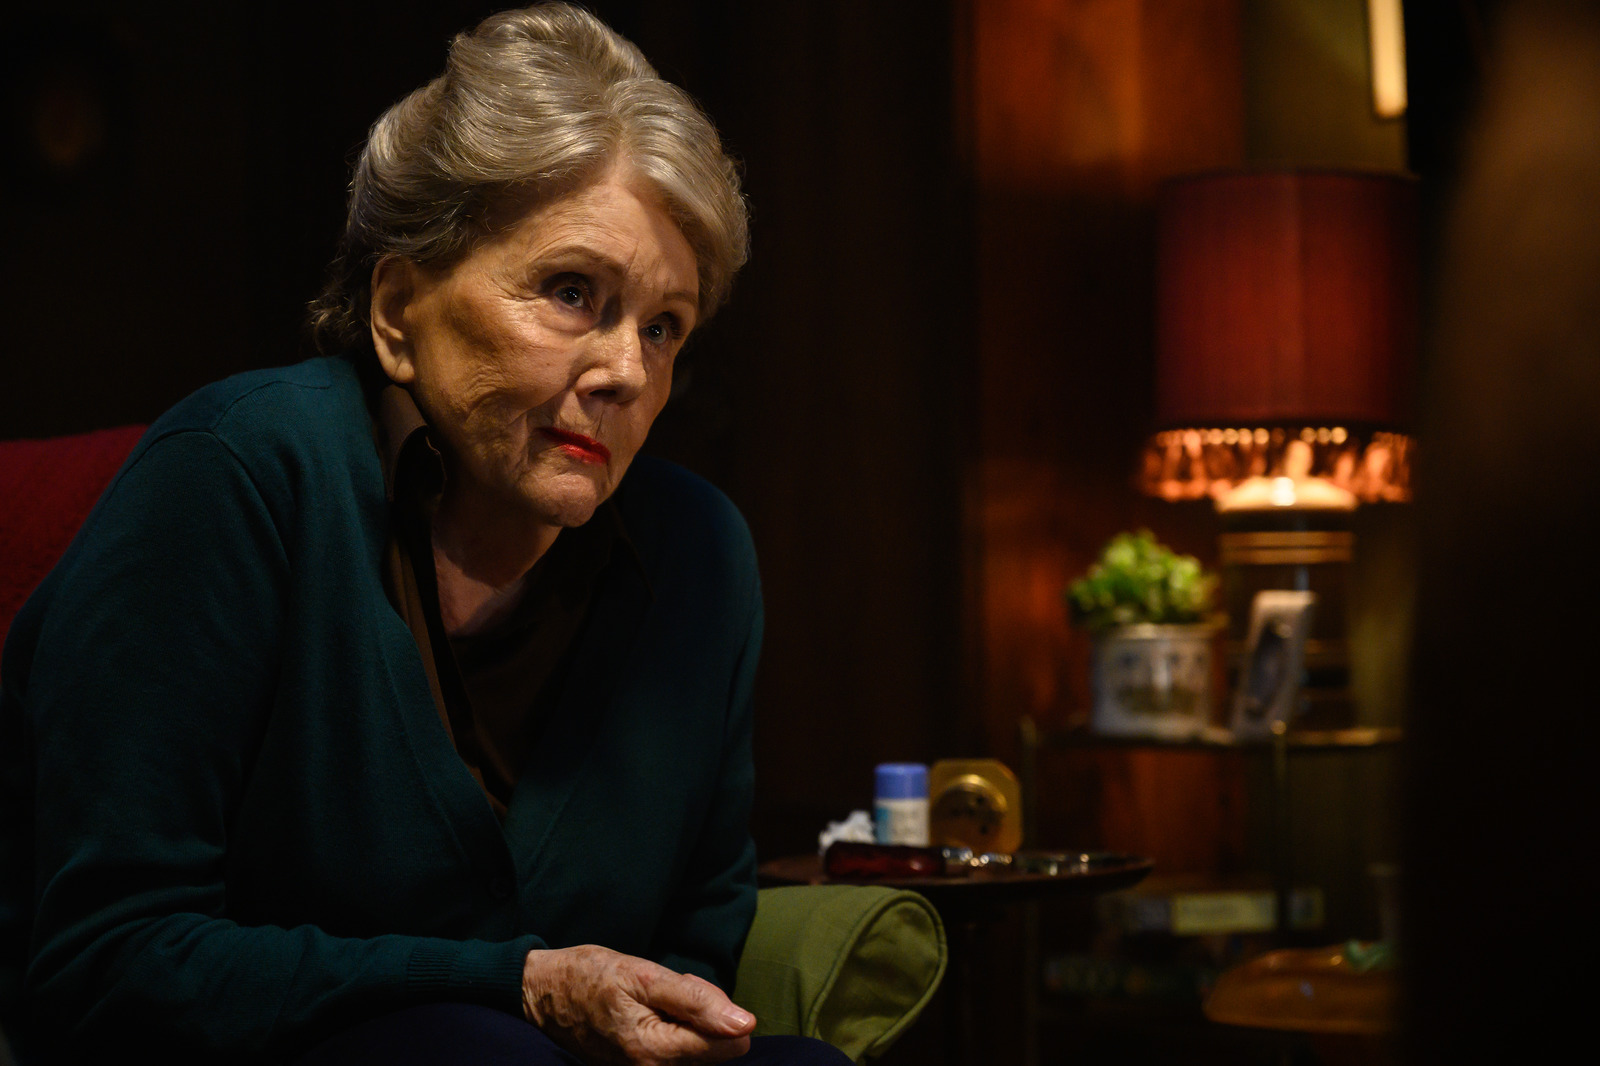 Diana Rigg stars as Ms. Collins in 'Last Night in Soho' (Parisa Taghizadeh / Focus Features)